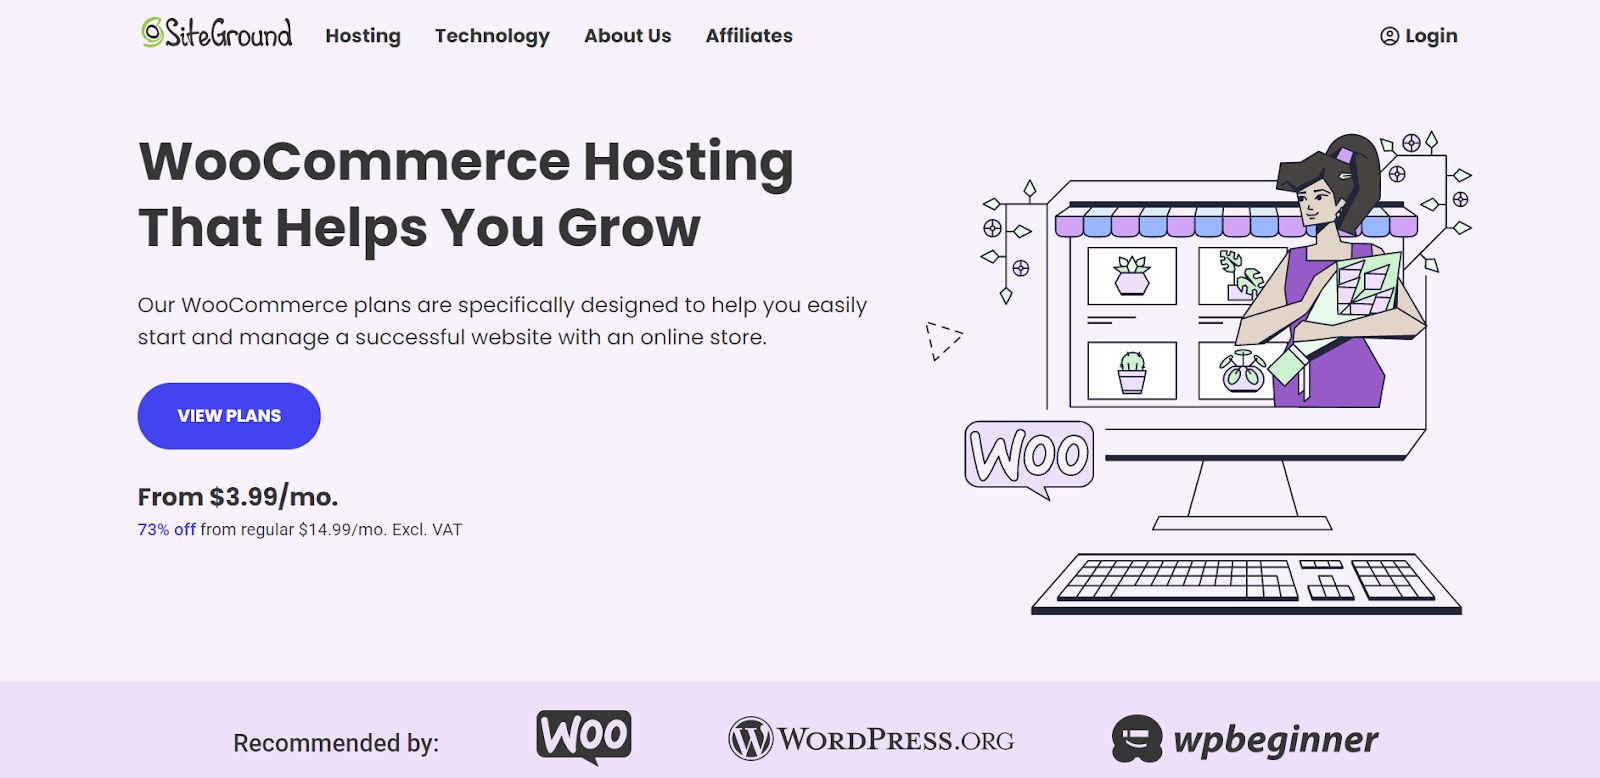 SiteGround is one of the best WooCommerce hosting services and runs on Google Cloud.